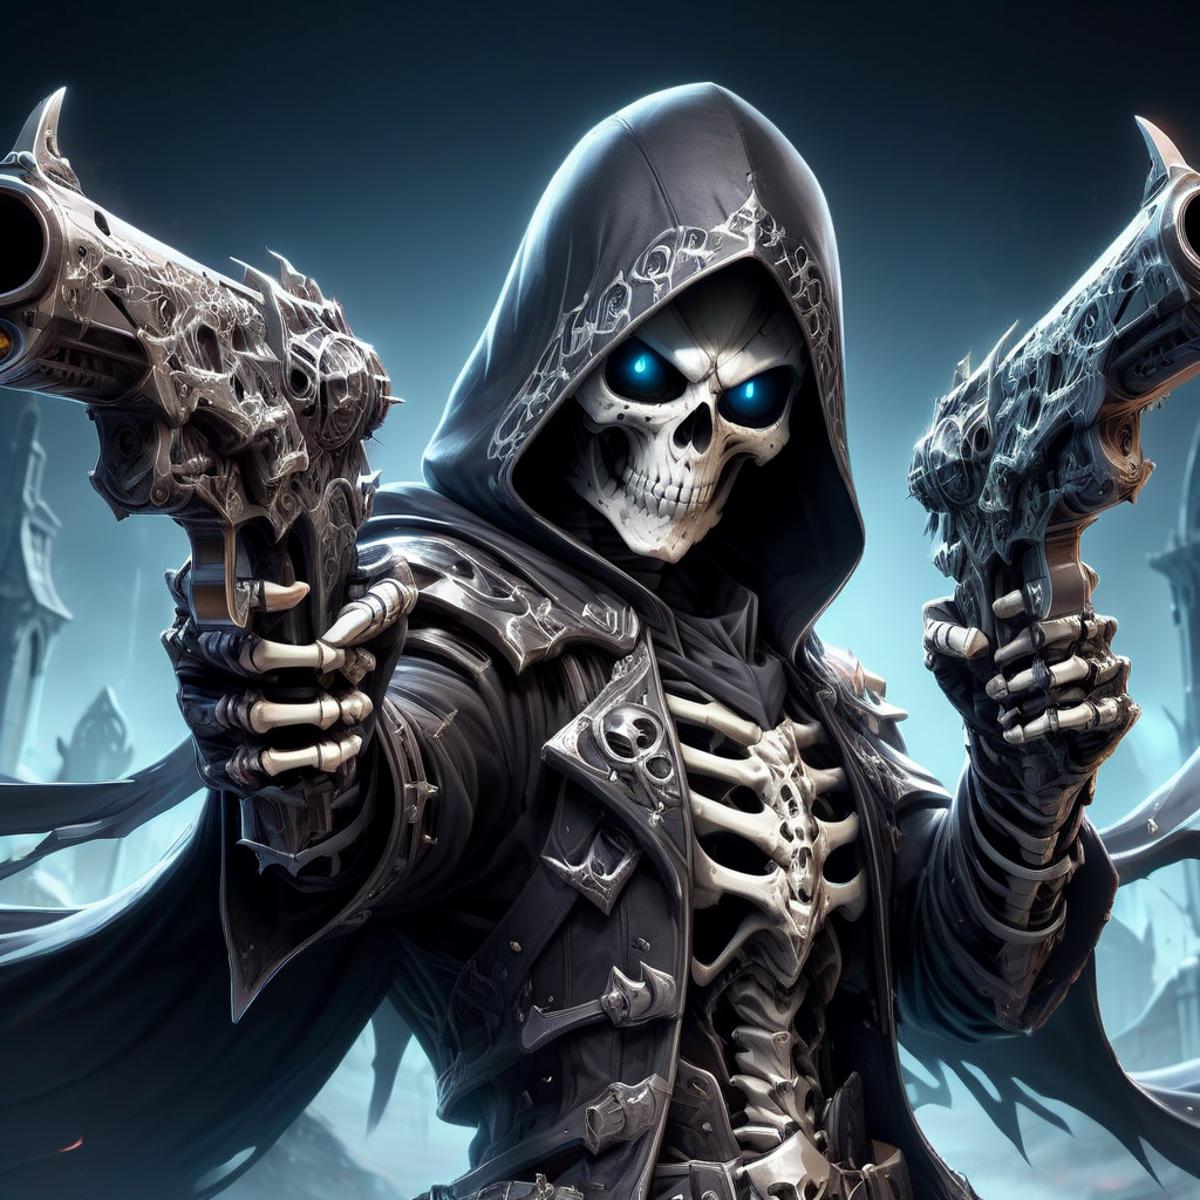 Black and White Skeleton Warrior with Gun in Hand